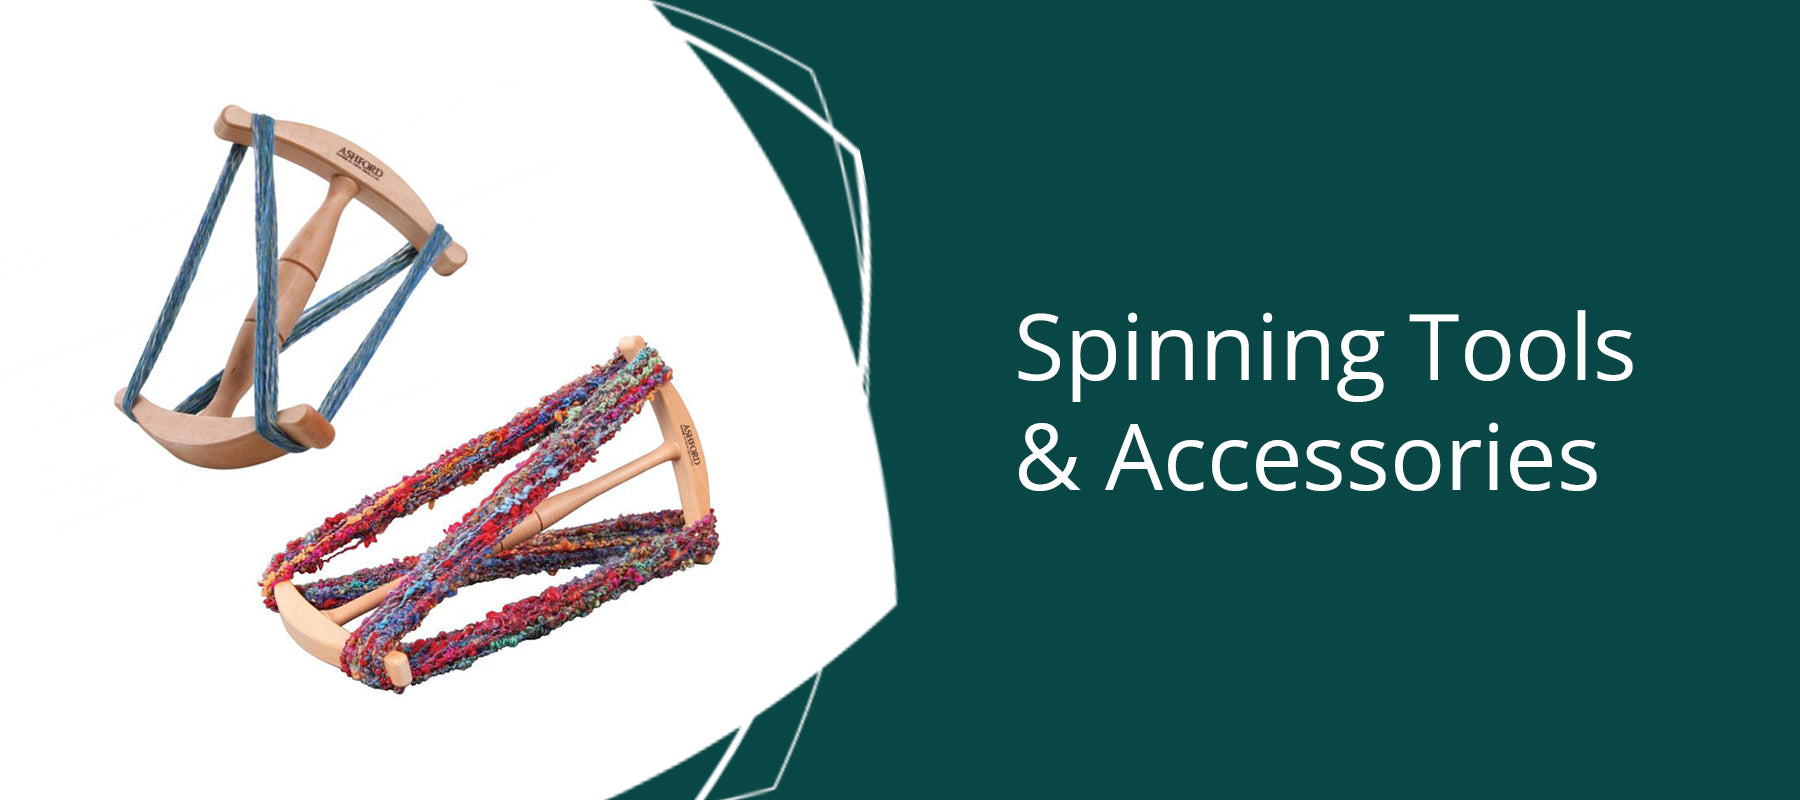 Spinning Tools & Accessories - Thread Collective Australia